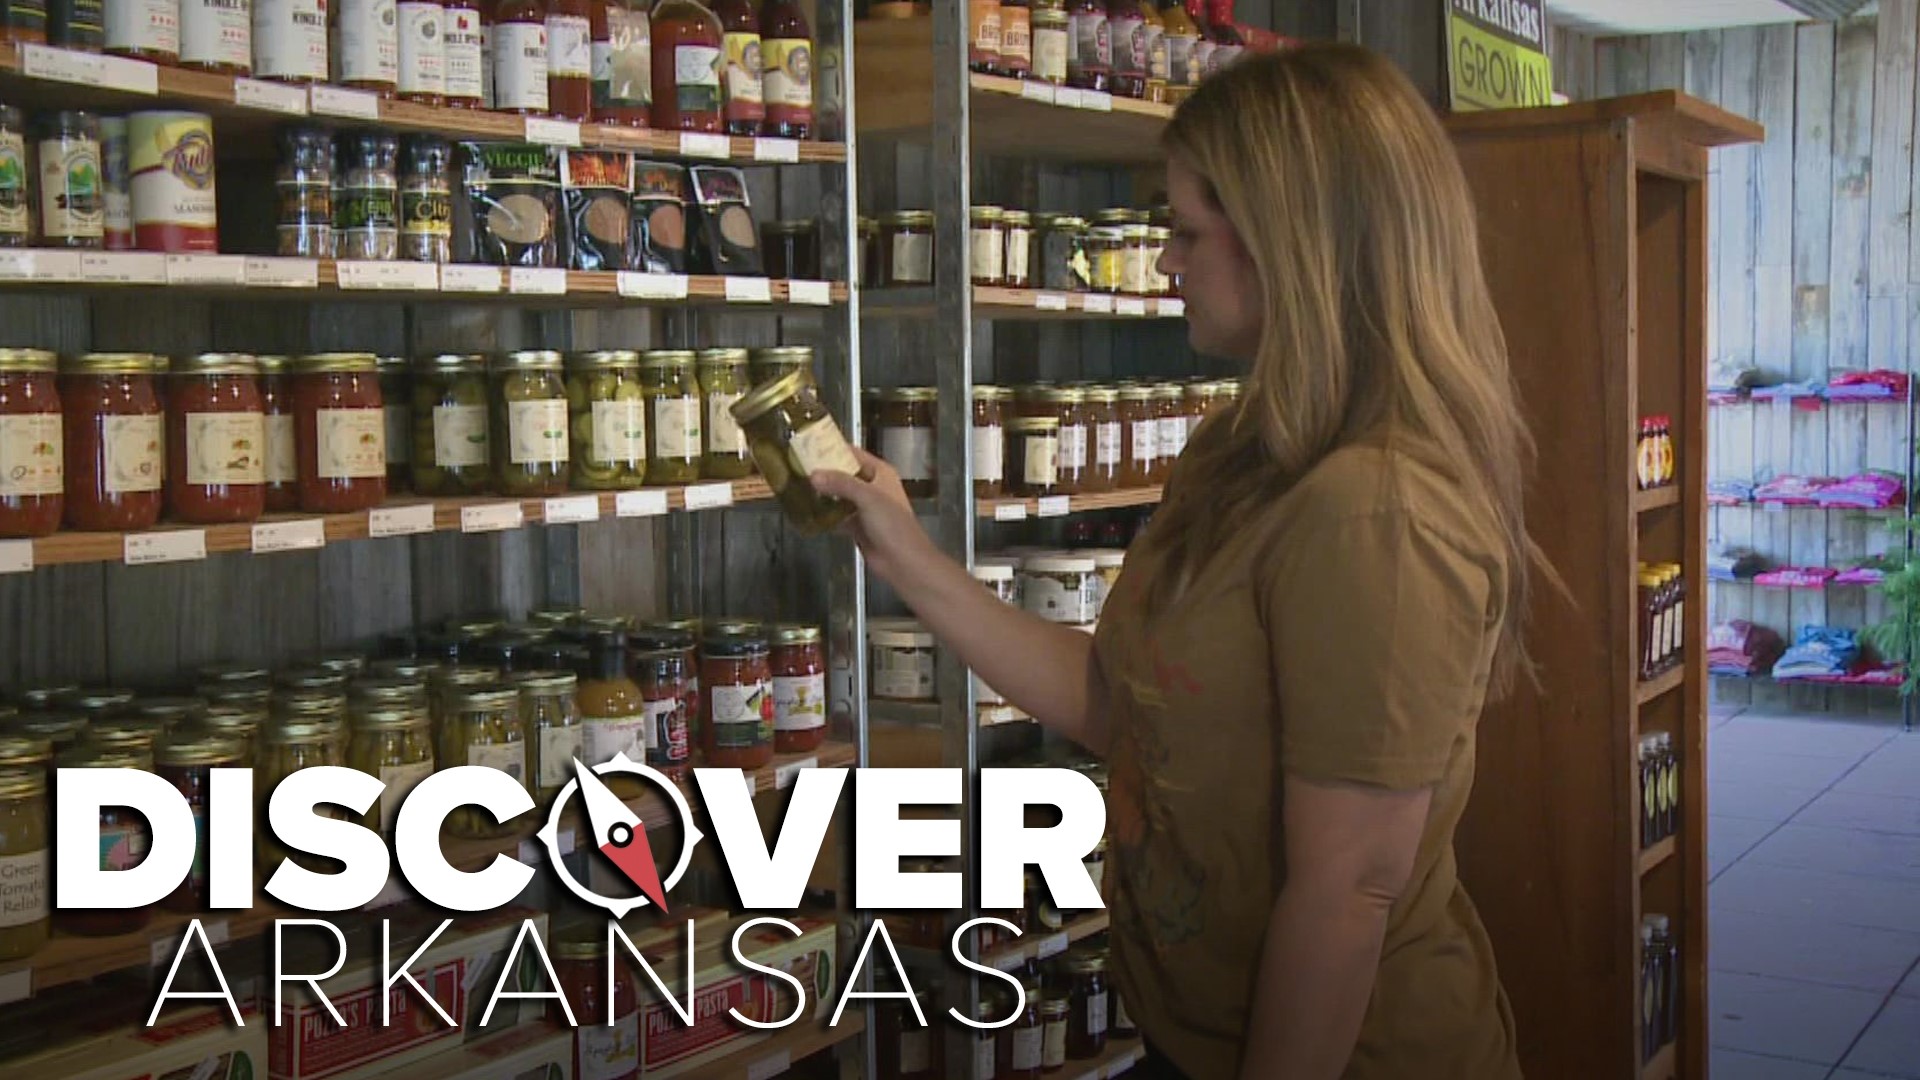 Ashley King takes Discover Arkansas to The Nurserie in Little Rock to look at some plants and local foods.